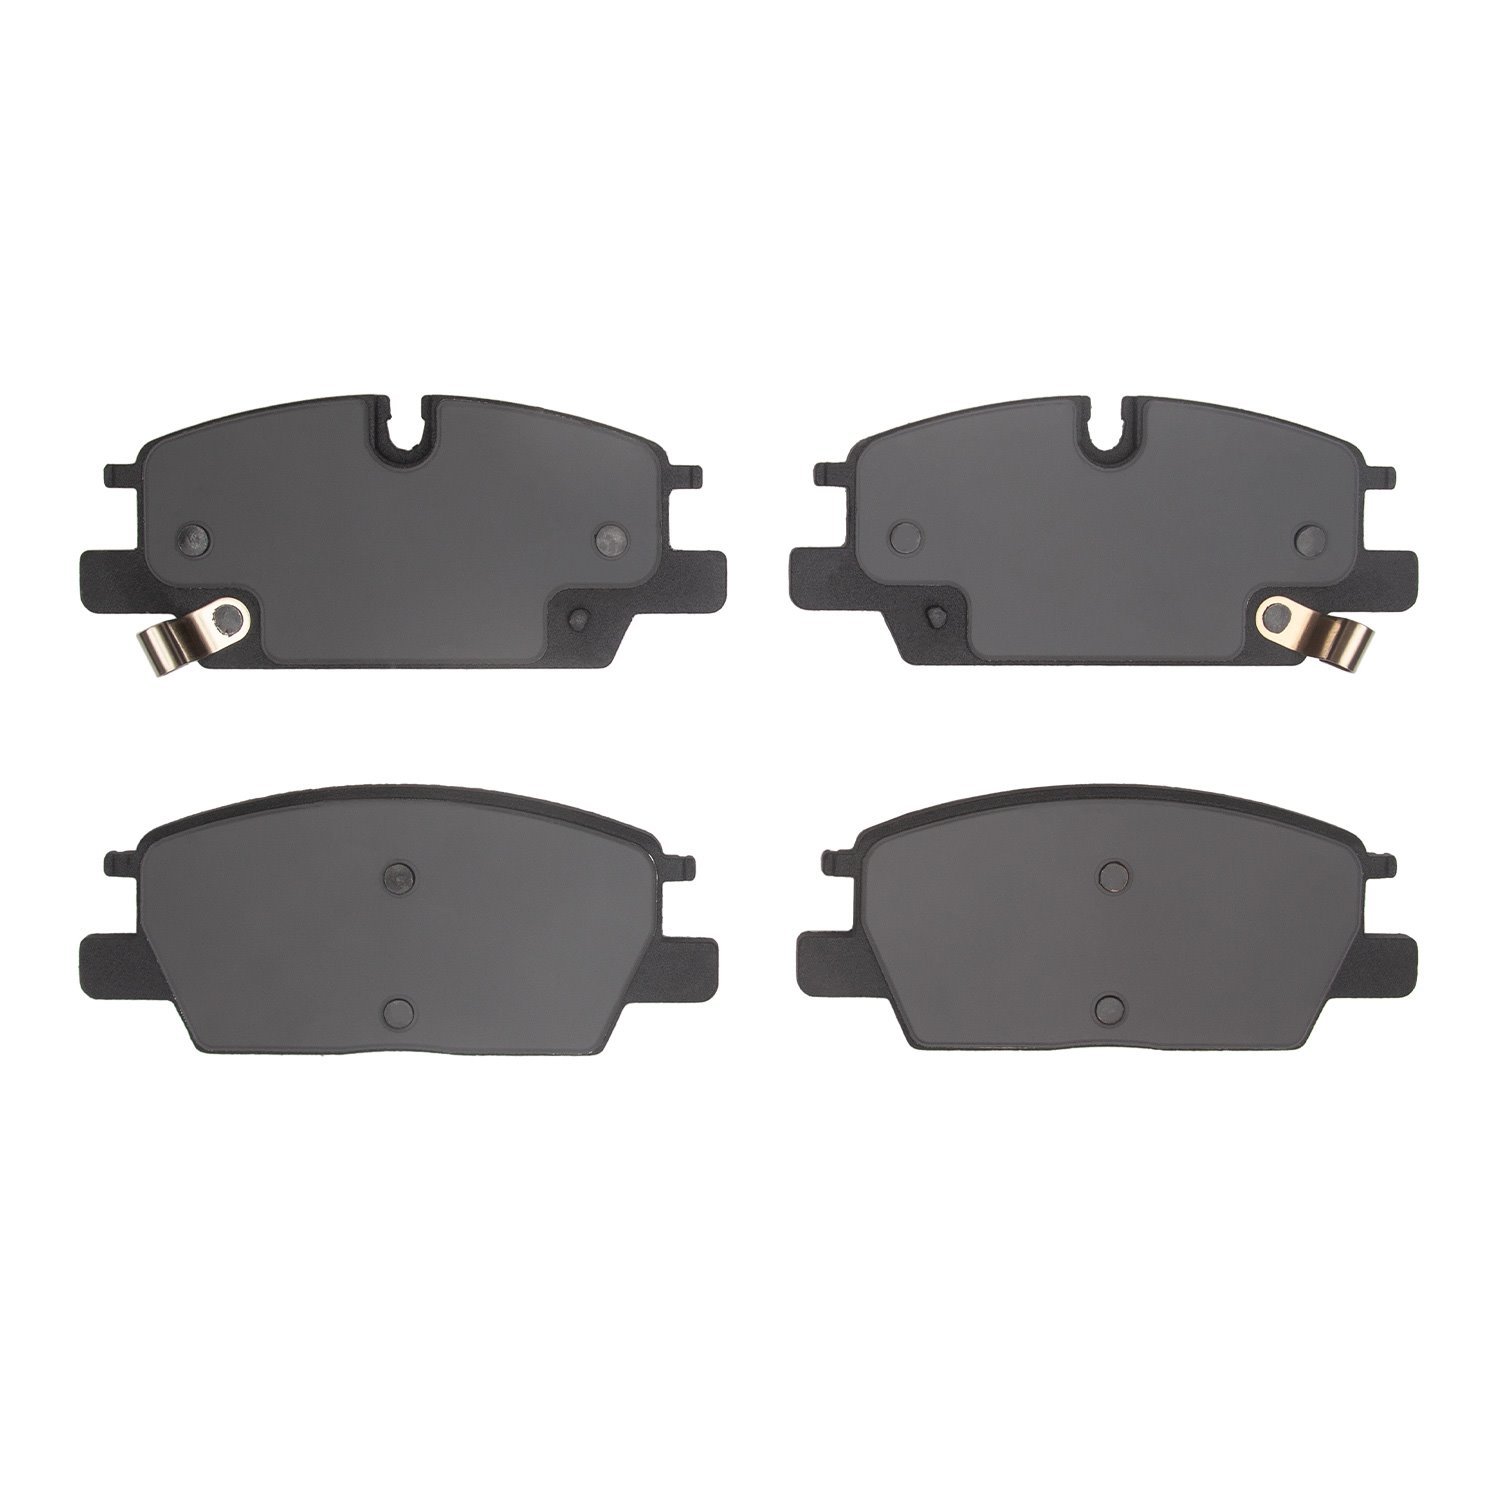 1310-2345-00 3000-Series Ceramic Brake Pads, Fits Select GM, Position: Front